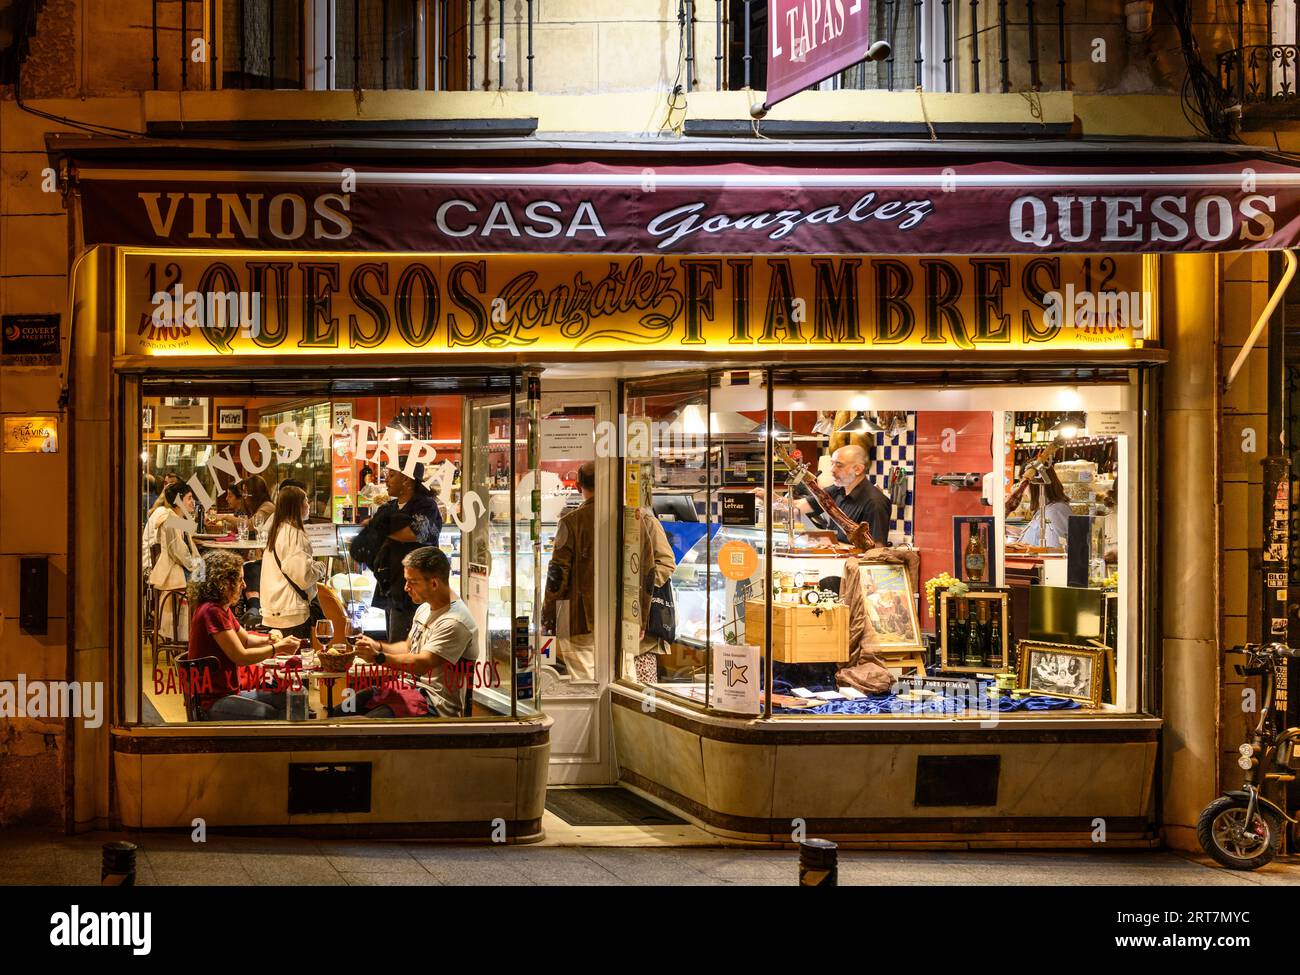 Casa Gonzales, a popular tapas bar and delicatessen selling a large variety of wines and cheeses.   in the Calle del Leon,  Barrio de las Letras, cent Stock Photo